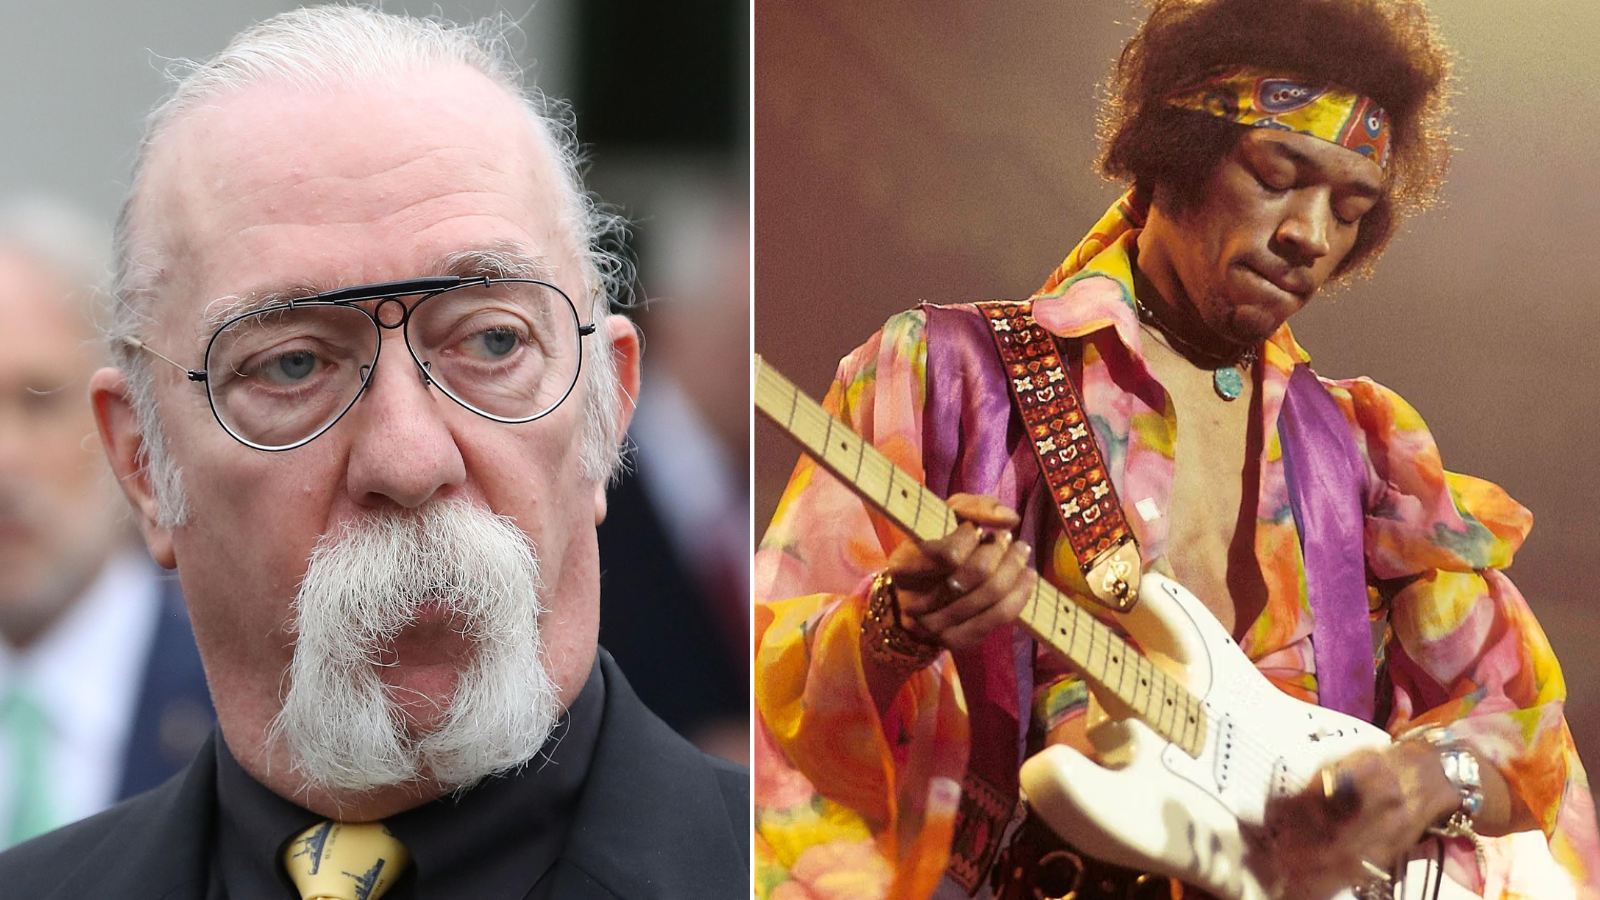 Ex-Steely Dan Guitarist Recalls Trading Guitars With Pre-Fame Jimi Hendrix, His Boss 'Got Real Mad' For It